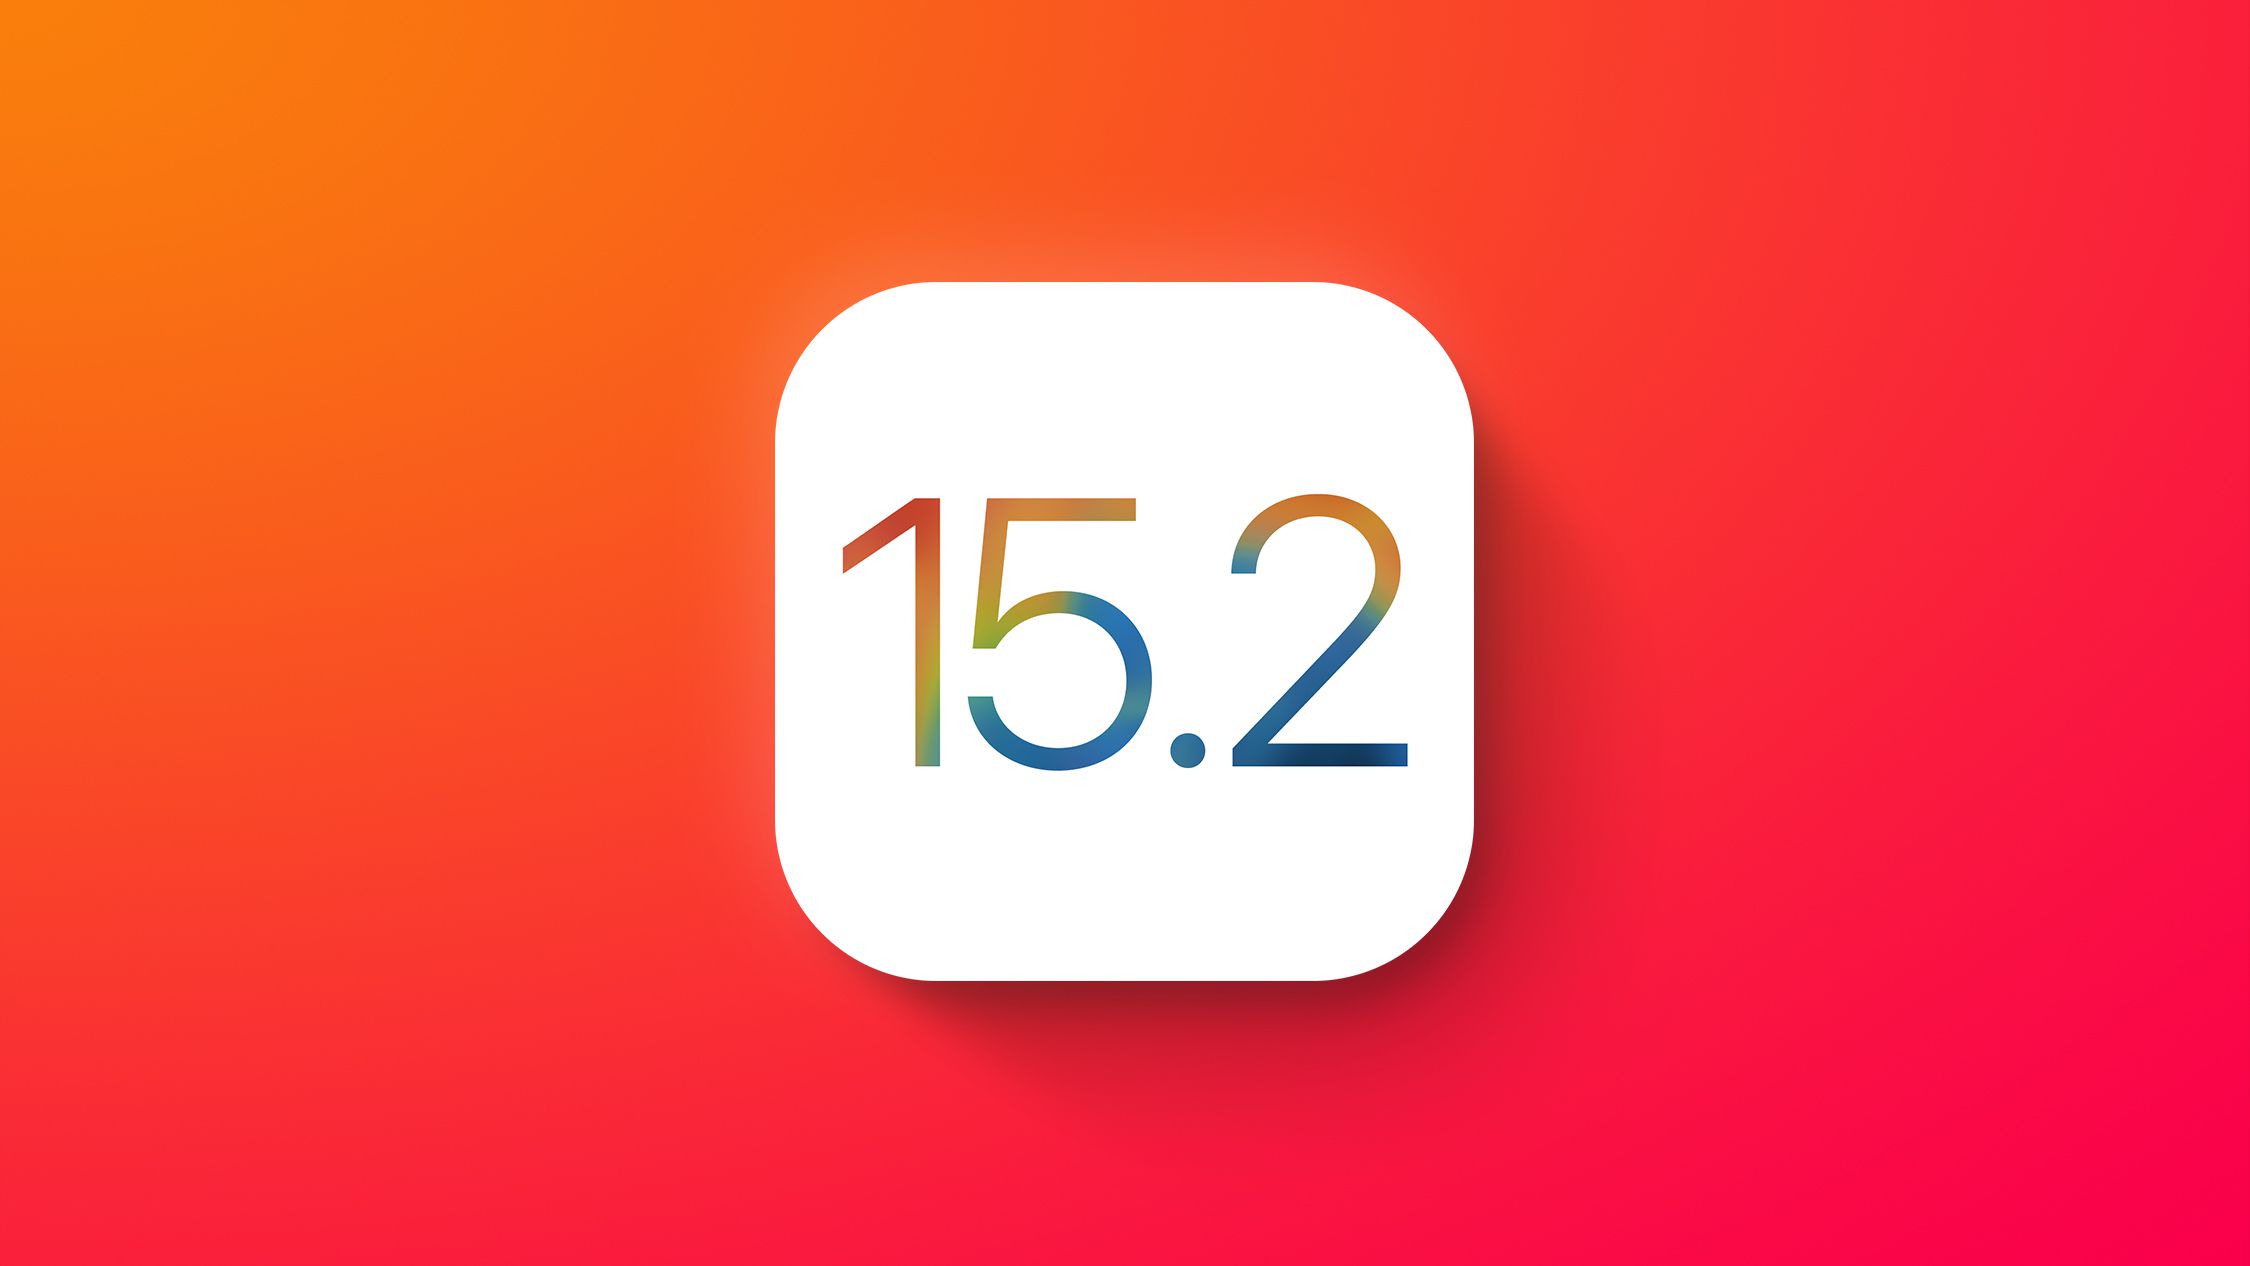 Apple Seeds Second Release Candidate Version of iOS 15.2 for iPhone 13 Models to Developers and Public Beta Testers - MacRumors